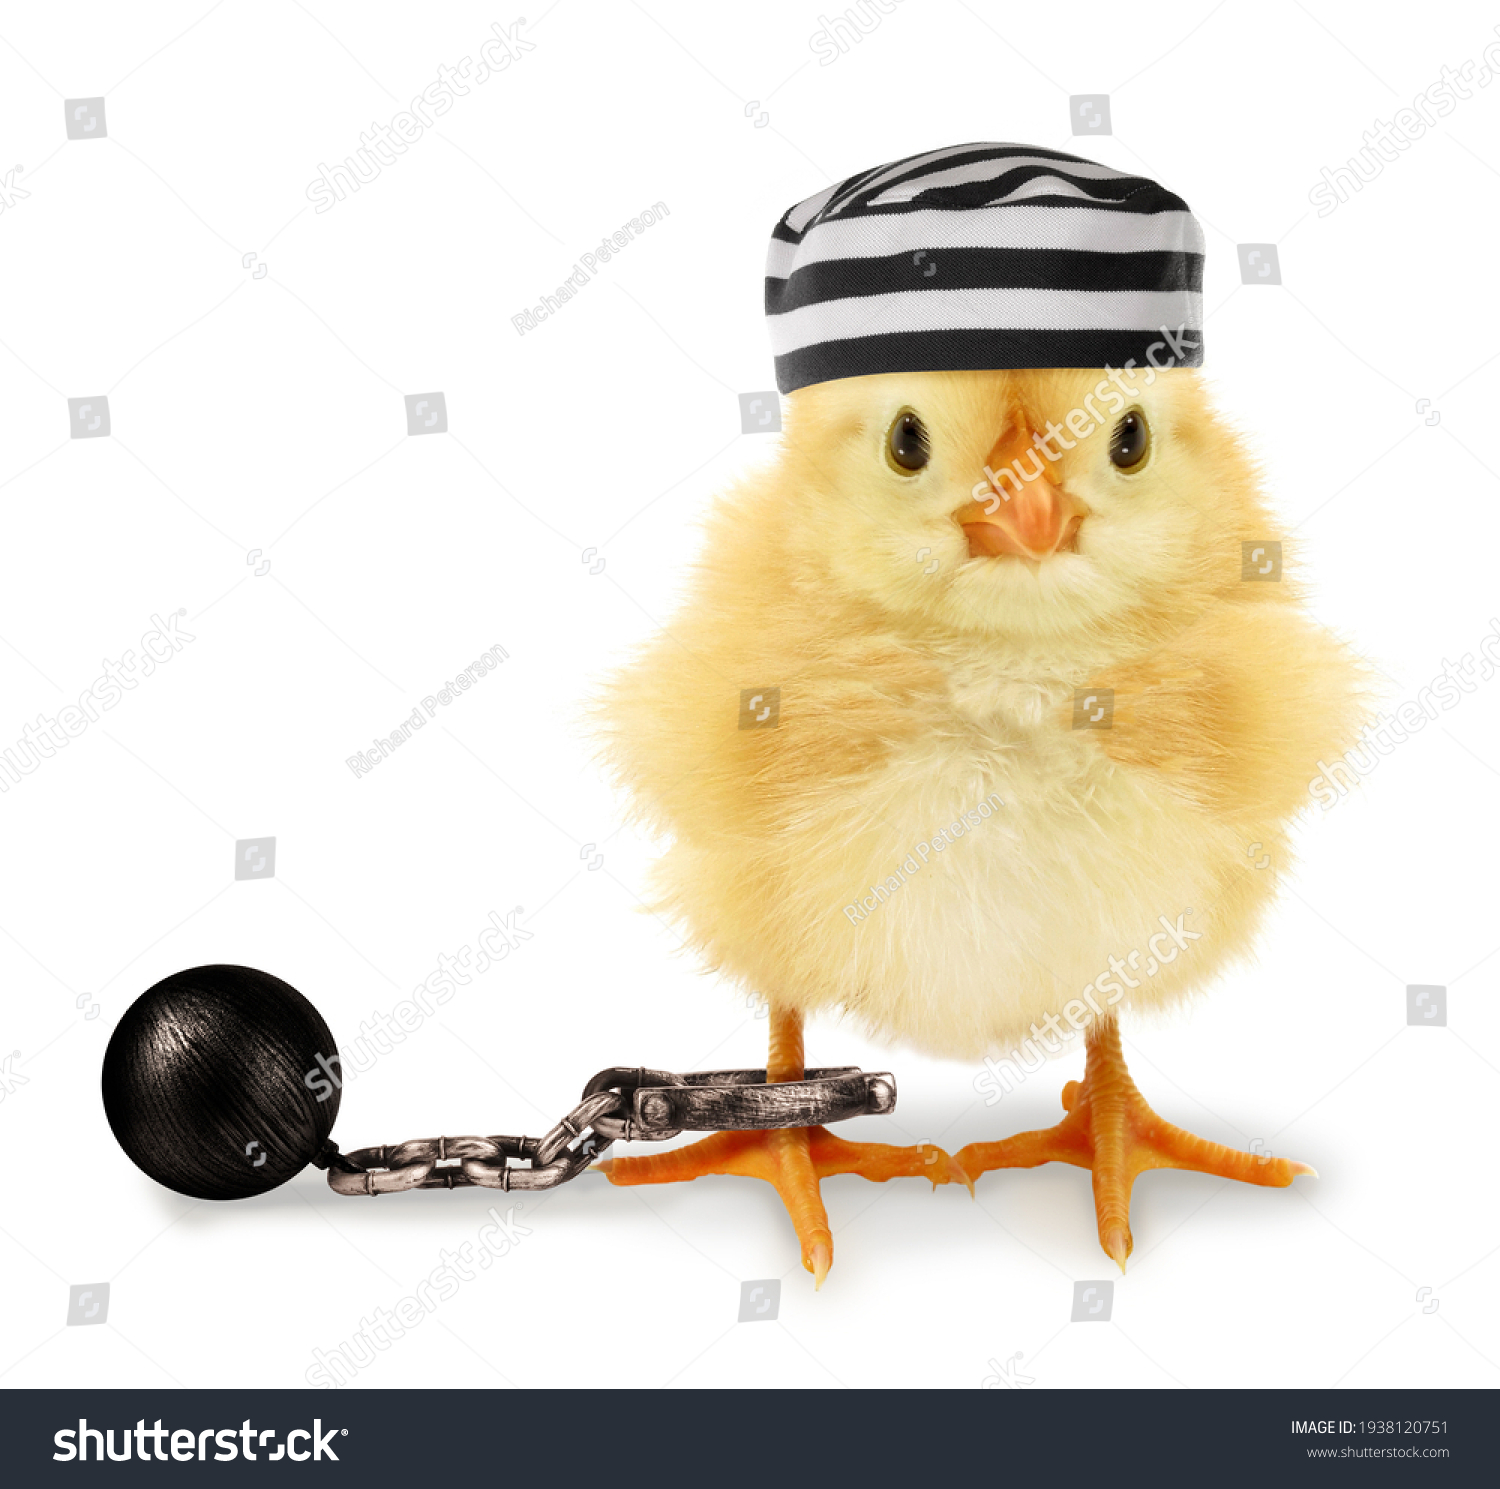 Cute cool chick prisoner jailbird with striped cap and fetter funny conceptual image  #1938120751